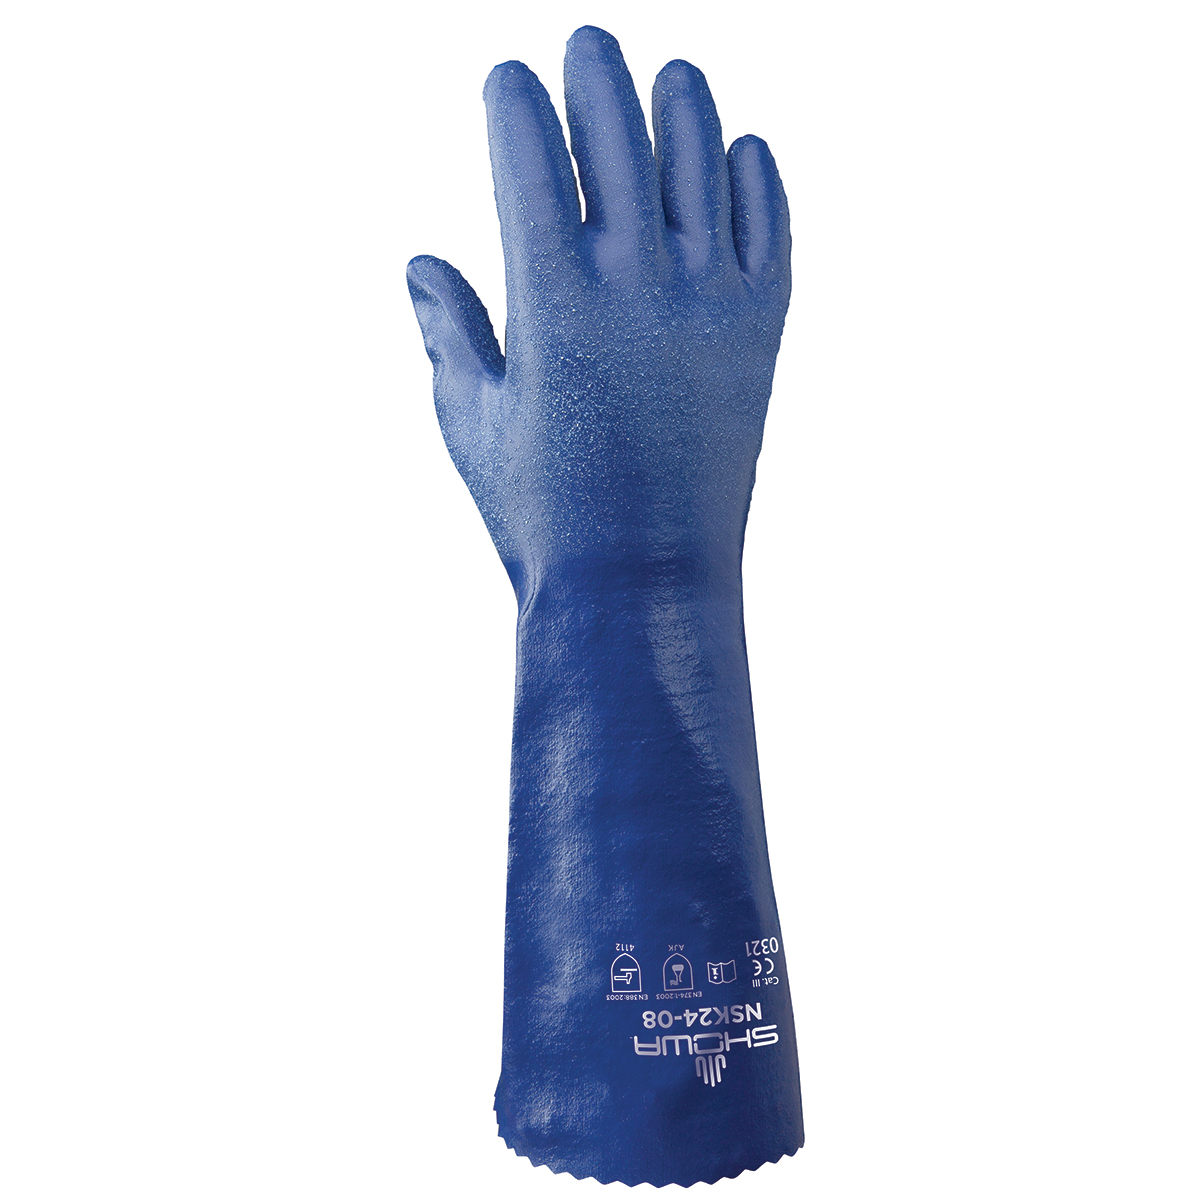 Chemical resistant nitrile, fully coated 14" gauntlet, royal blue, rough finish, interlock liner, small